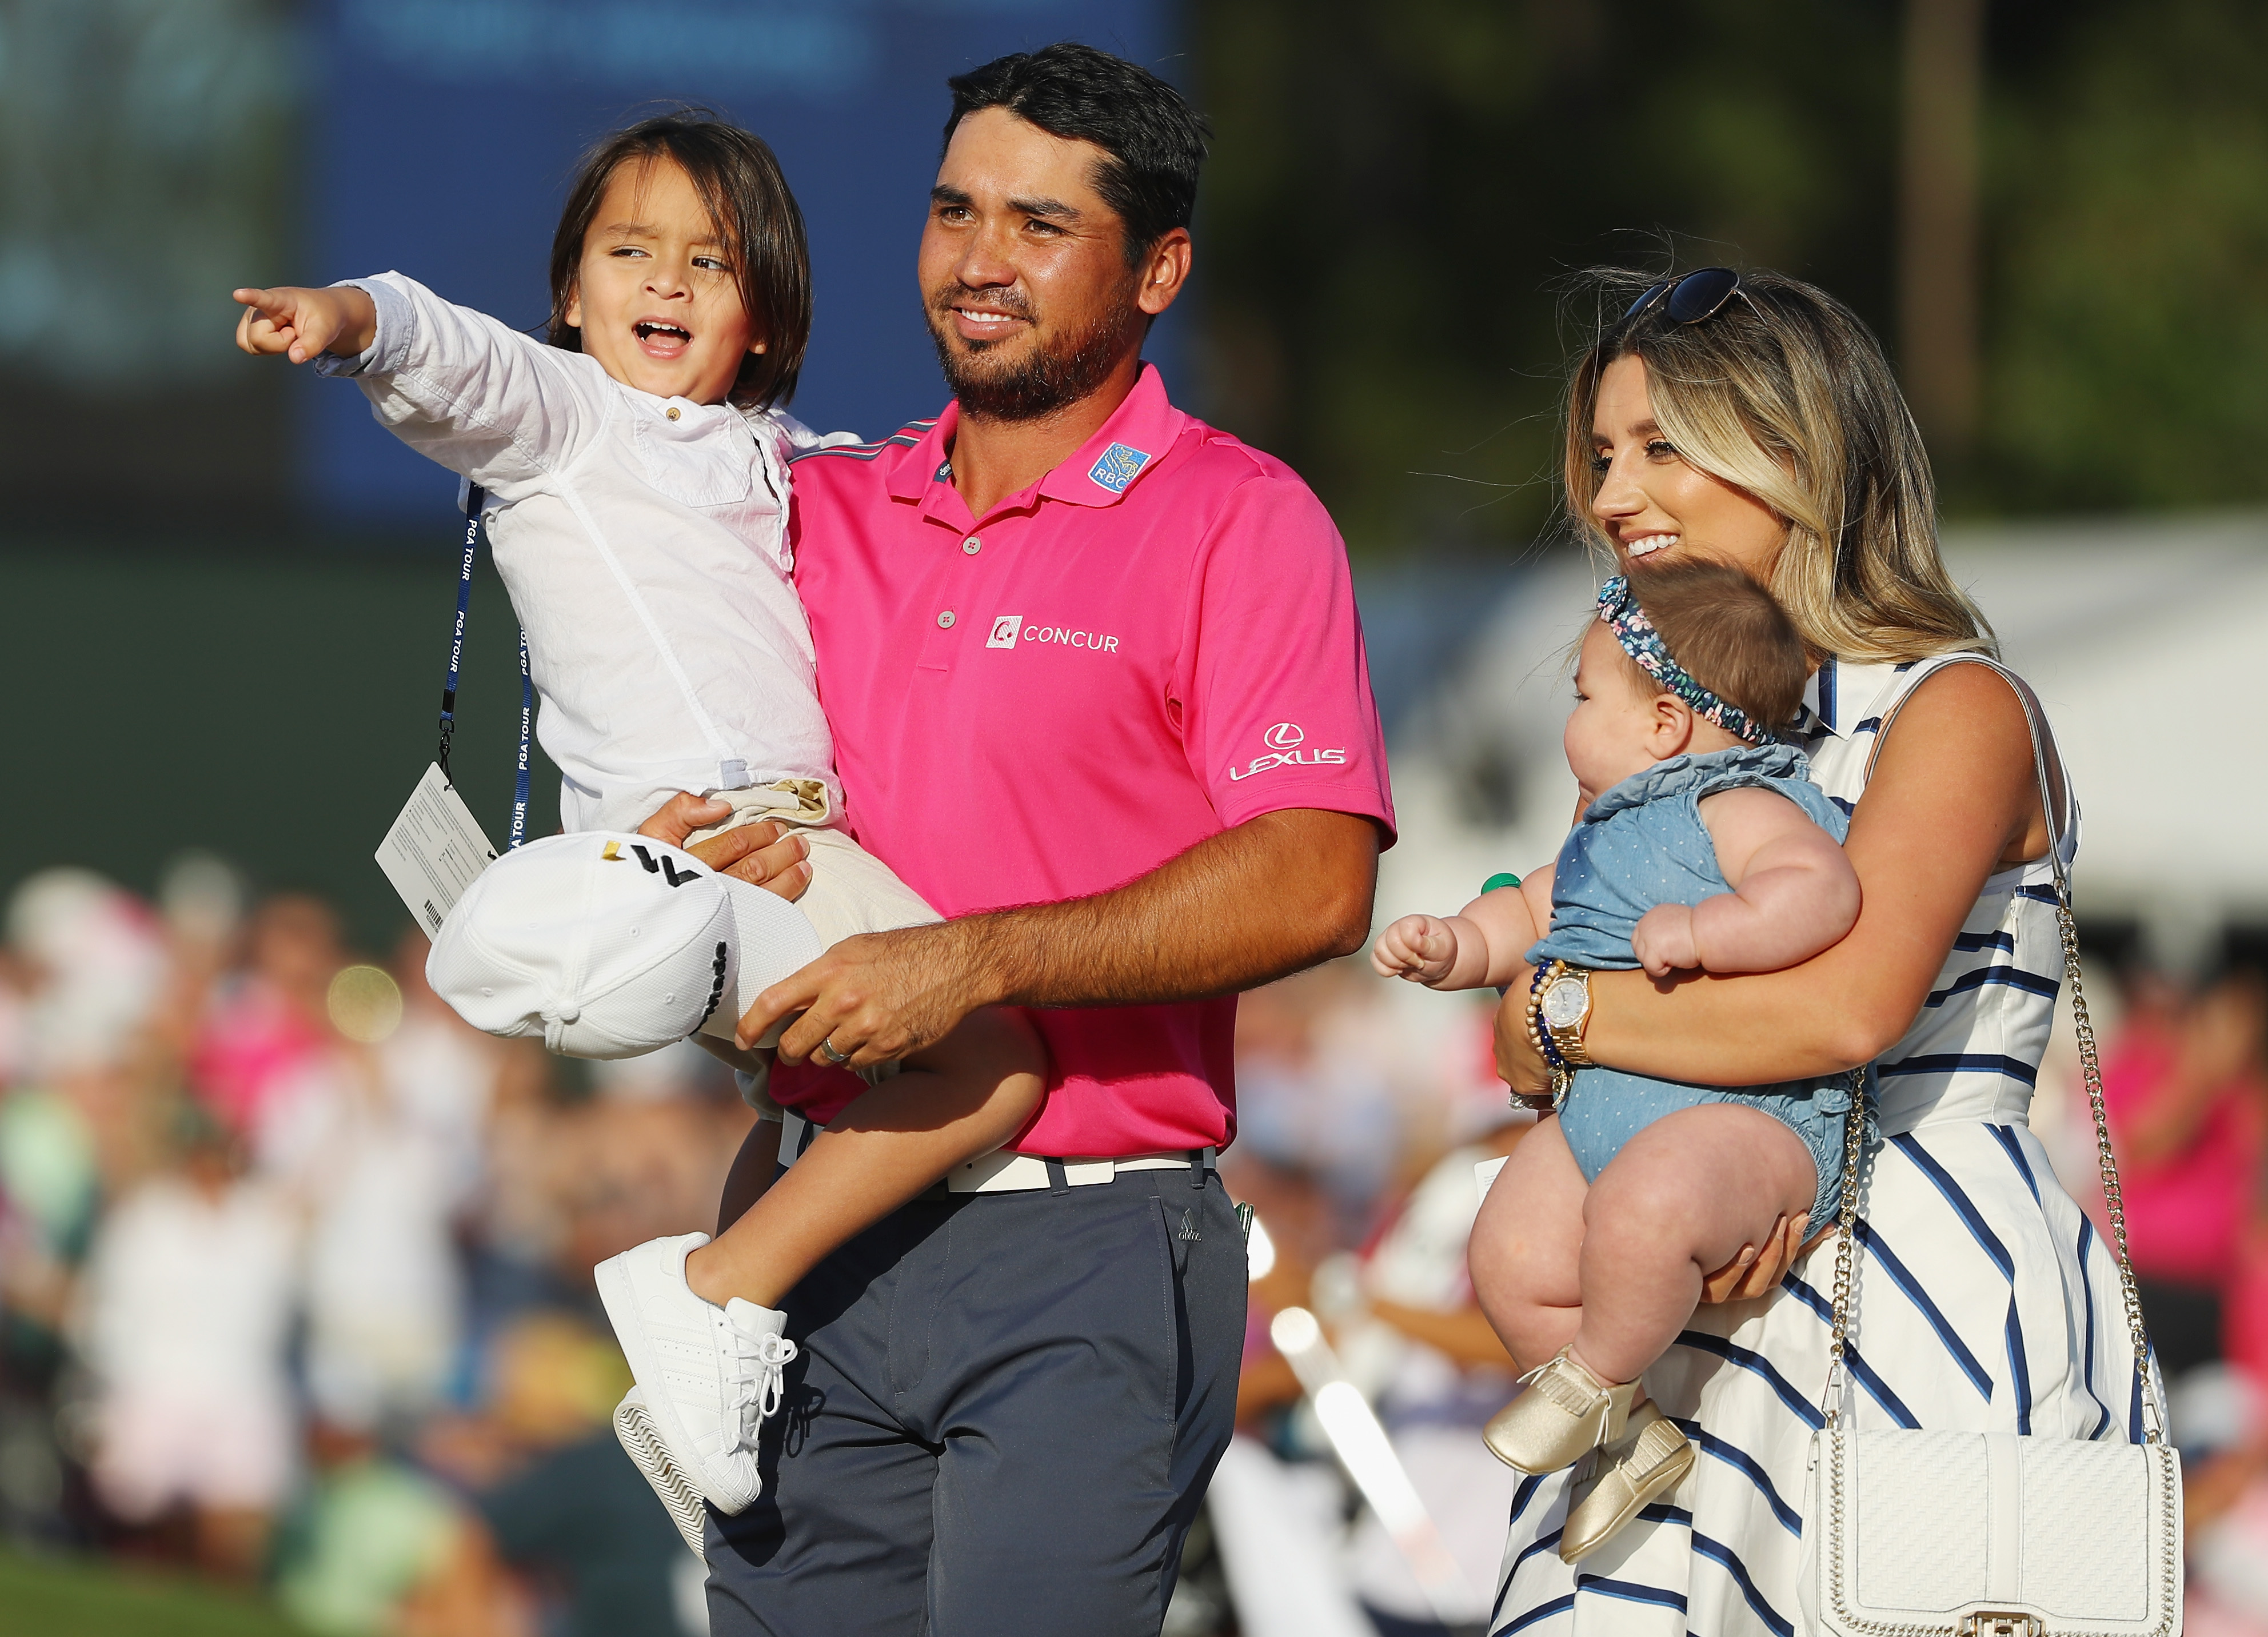 Dash Day, Jason Day’s Son 5 Fast Facts You Need to Know